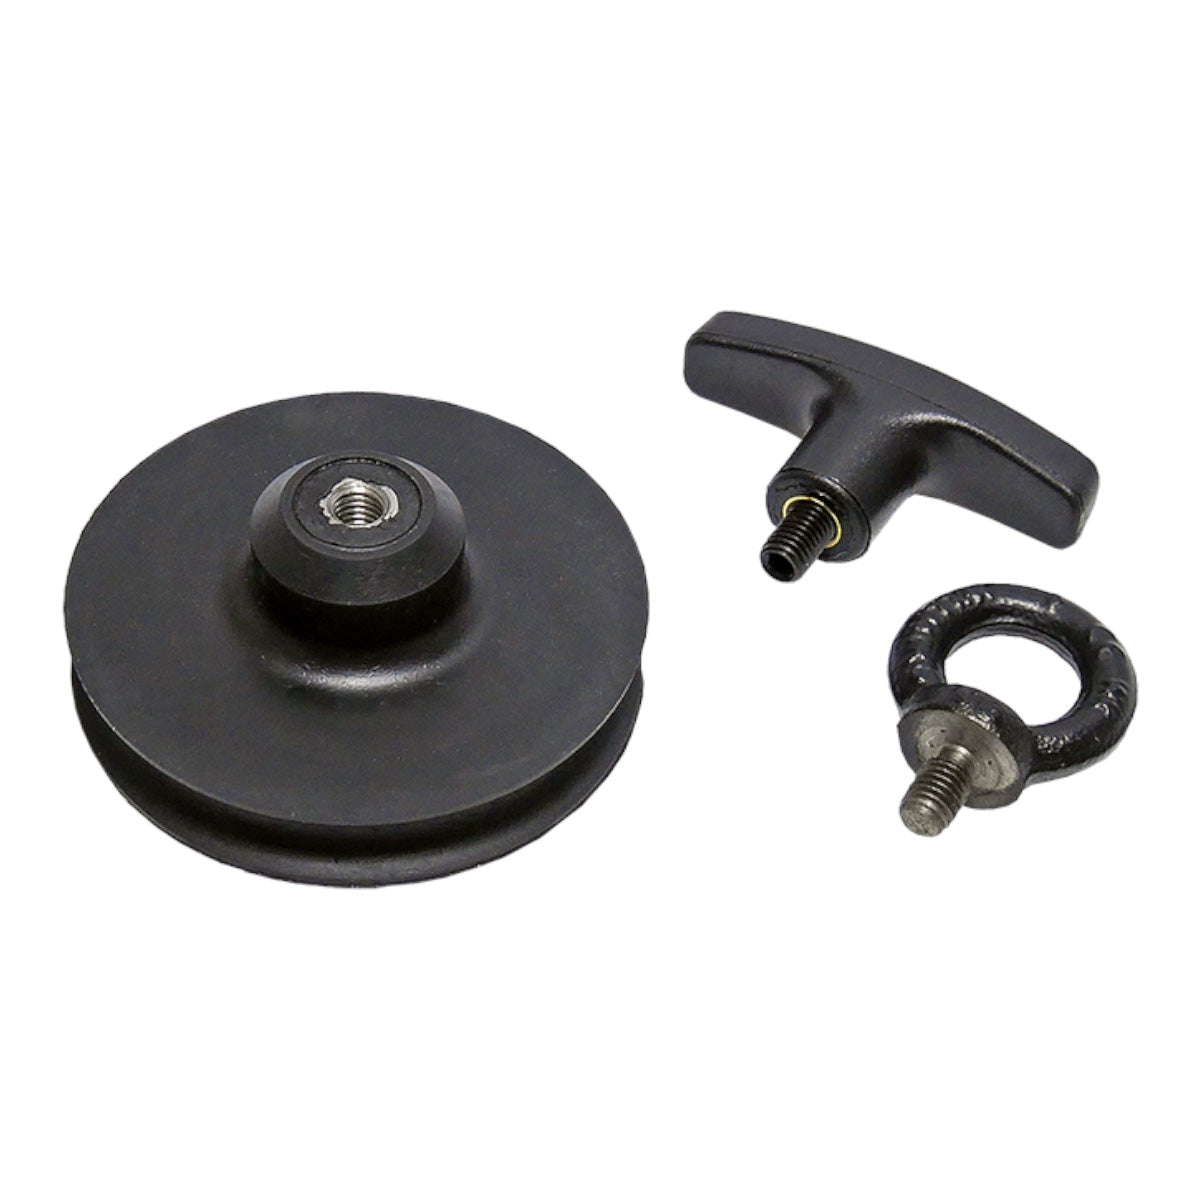 Suction lifter with T-handle and eyelet mounting aid for exterior mirrors